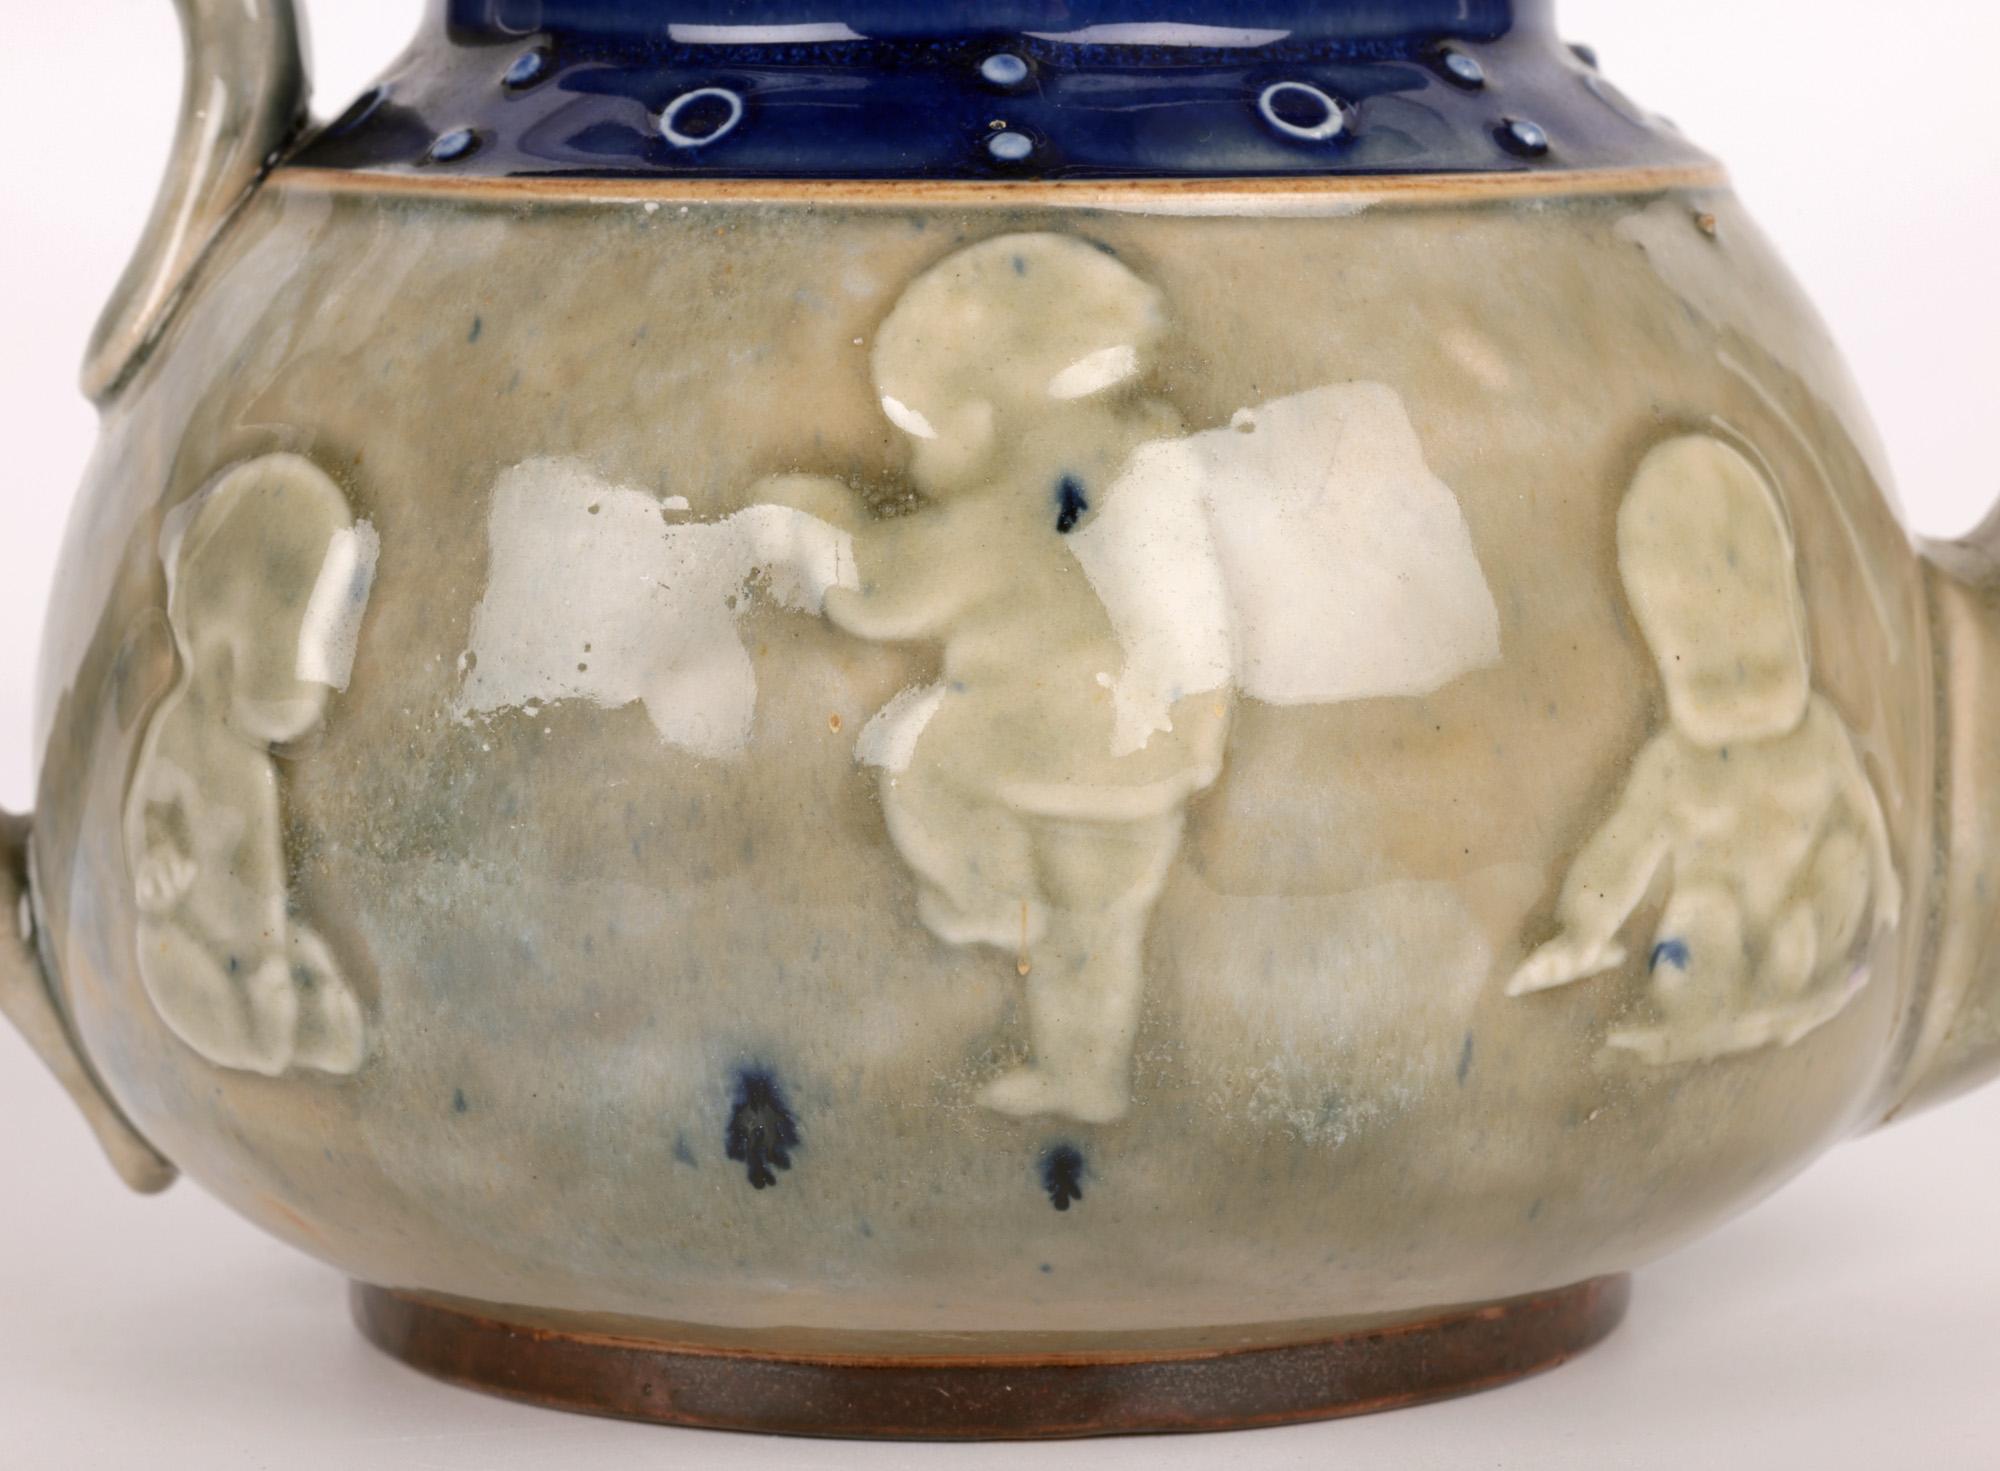 A very fine and stylish Art Deco Doulton Lambeth teapot decorated in relief with babies by renowned artist Bessie Newbery dating from around 1922. The stoneware teapot is a unique work by Newbery who produced a number of original works between 1914